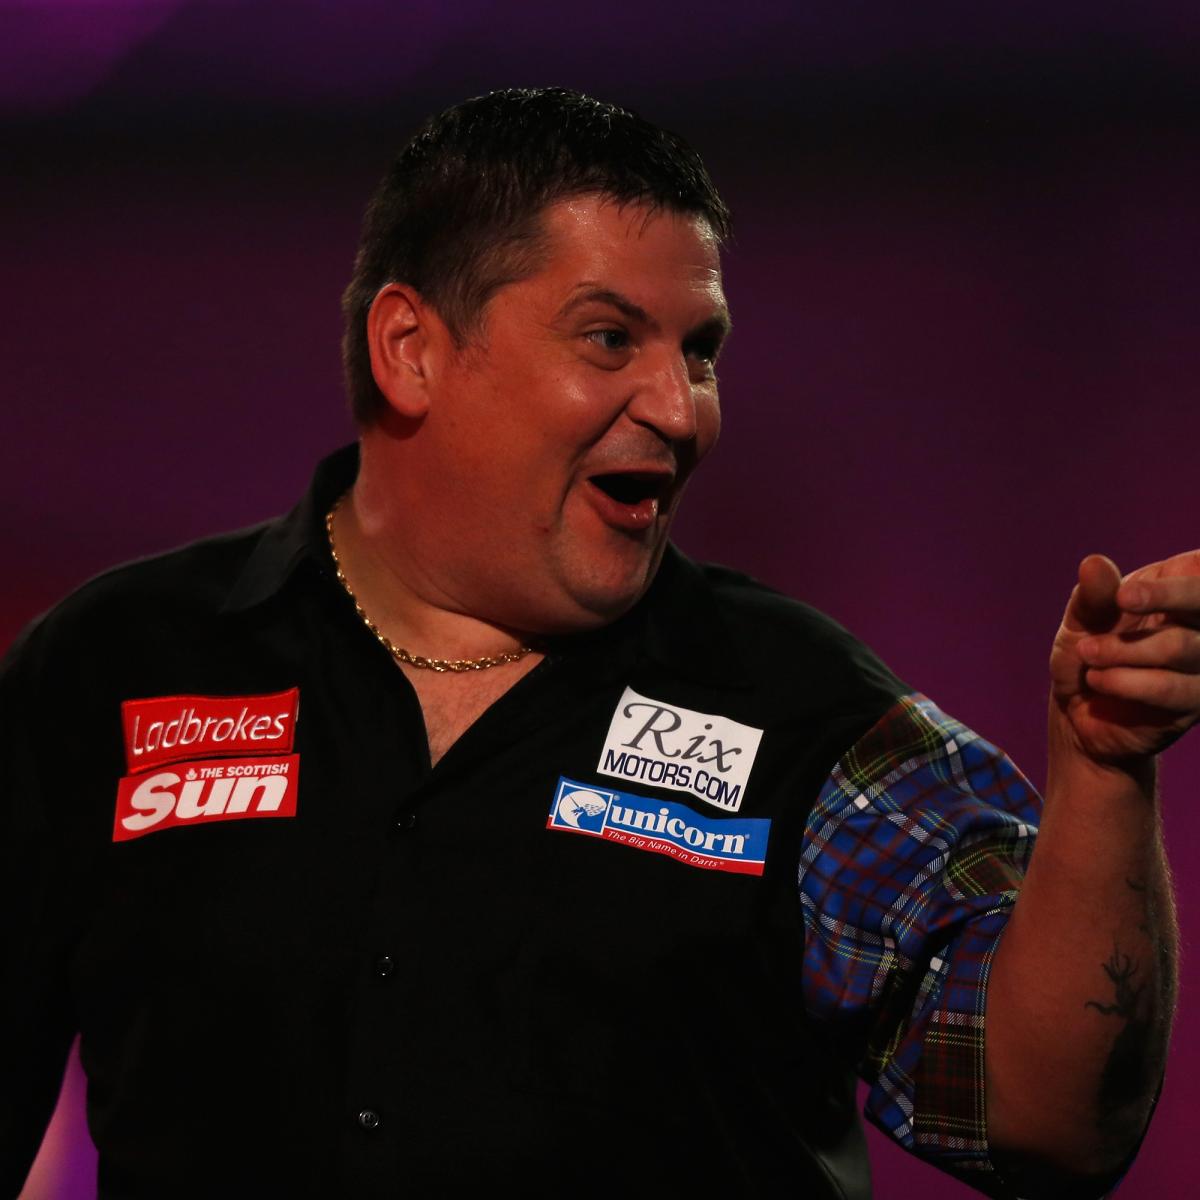 Championship Darts 1 2014 Scores, Order of and Analysis | News, Highlights, Stats, and Rumors | Bleacher Report